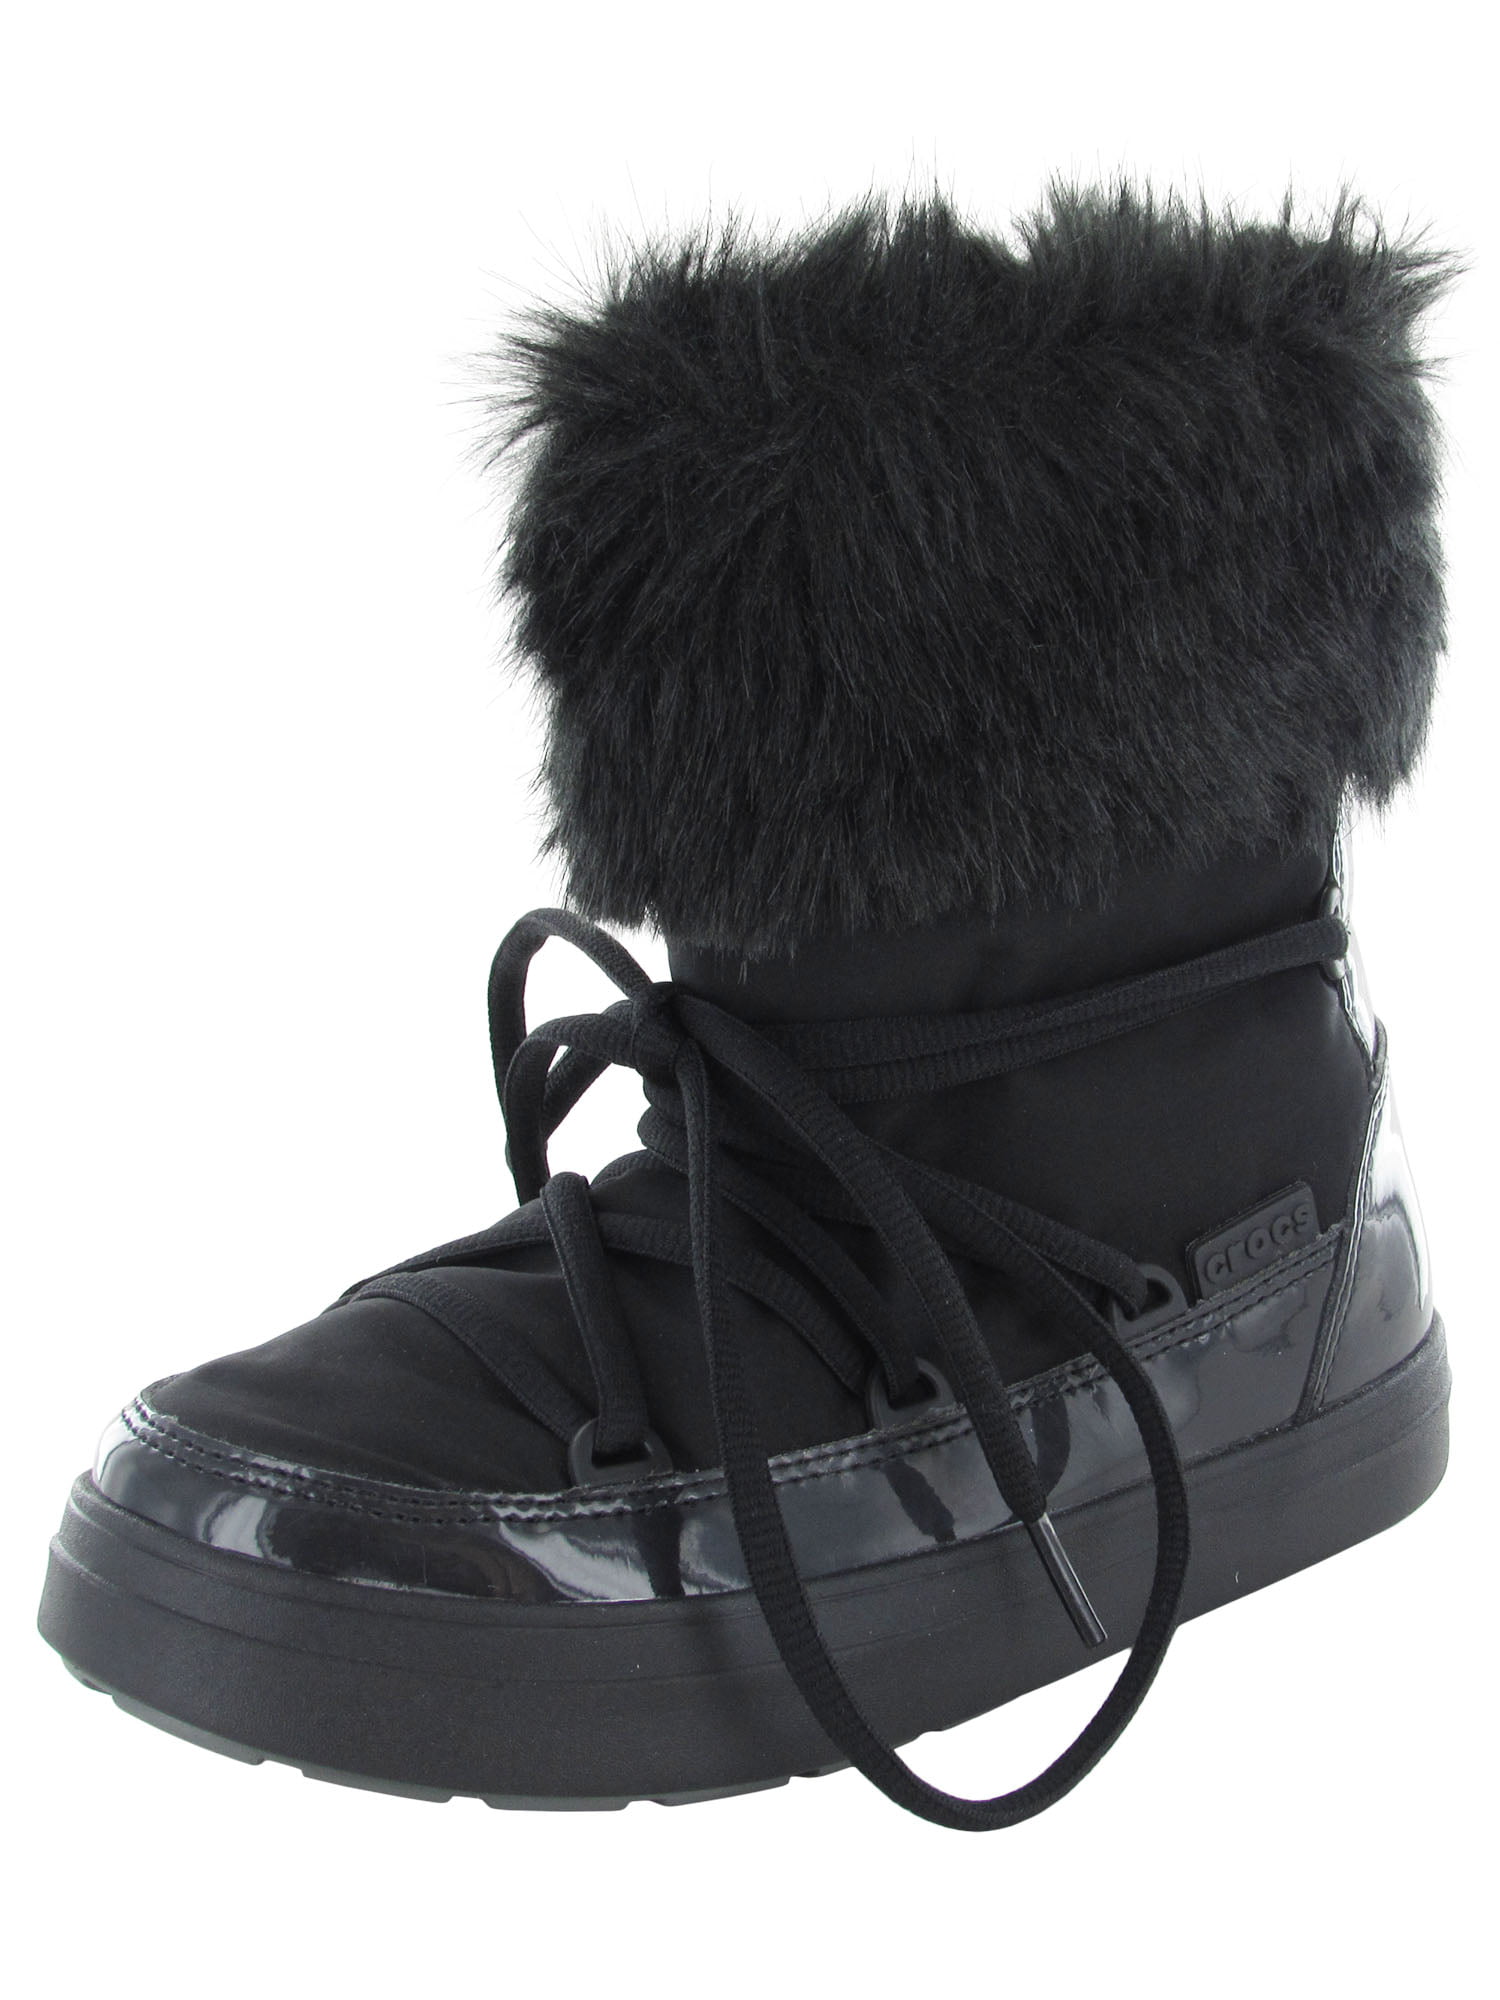 grain triangle hammer Crocs Womens LodgePoint Lace Up Snow Boot Shoes, Black, US 11 - Walmart.com